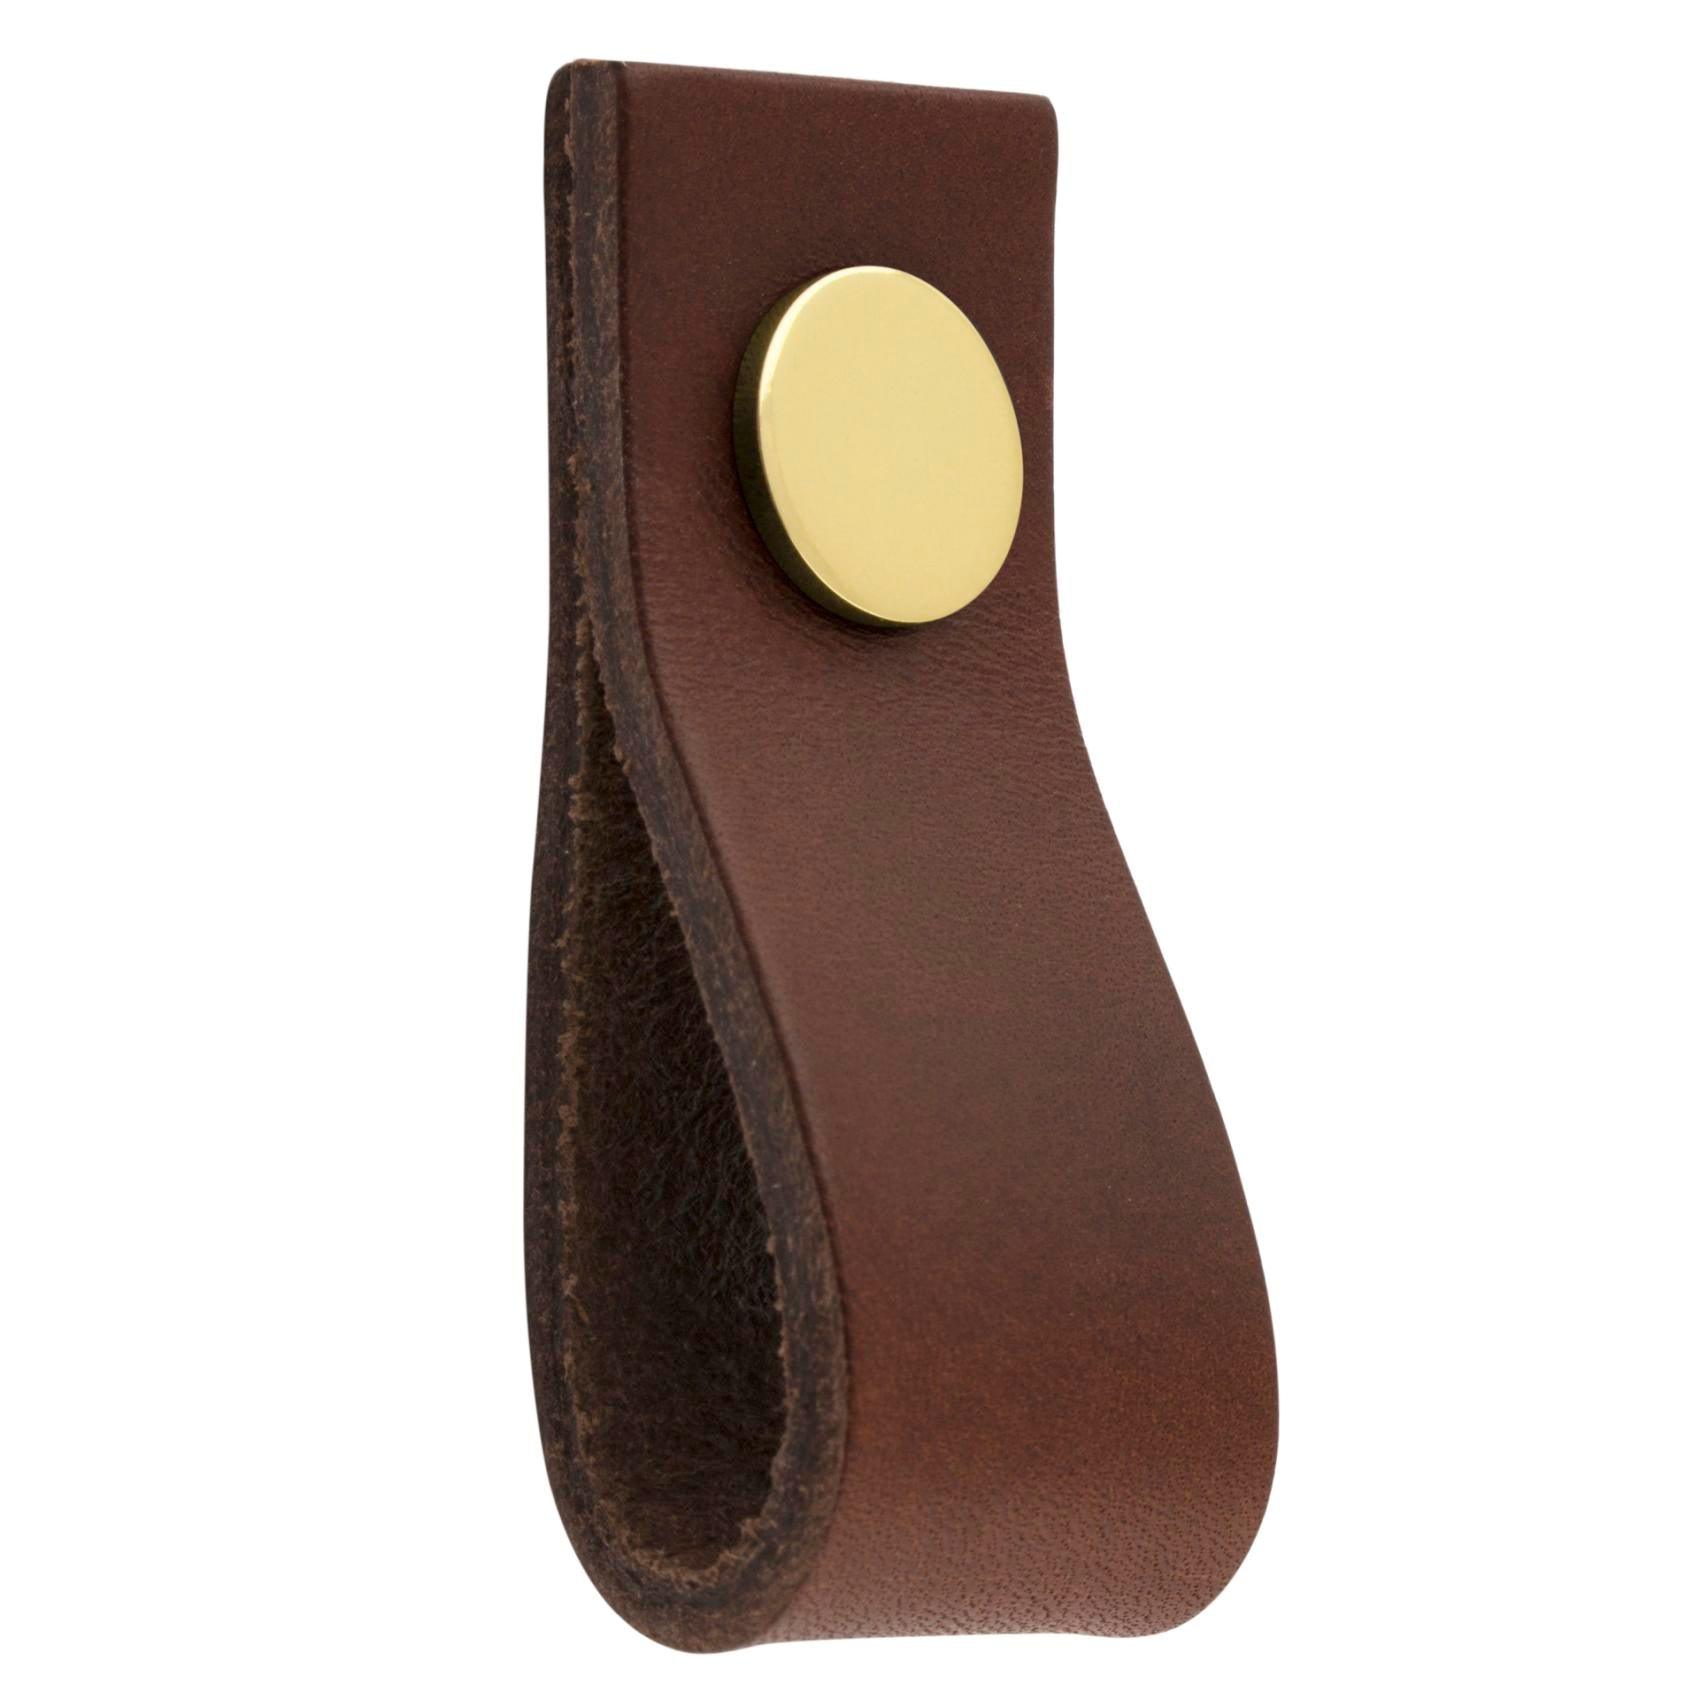 MANER TIP BUTON ARI BRASS/BROWN LEATHER inaltime 25 mm, grosime 2,5 mm, lungime 65 mm - PARIS14A.RO